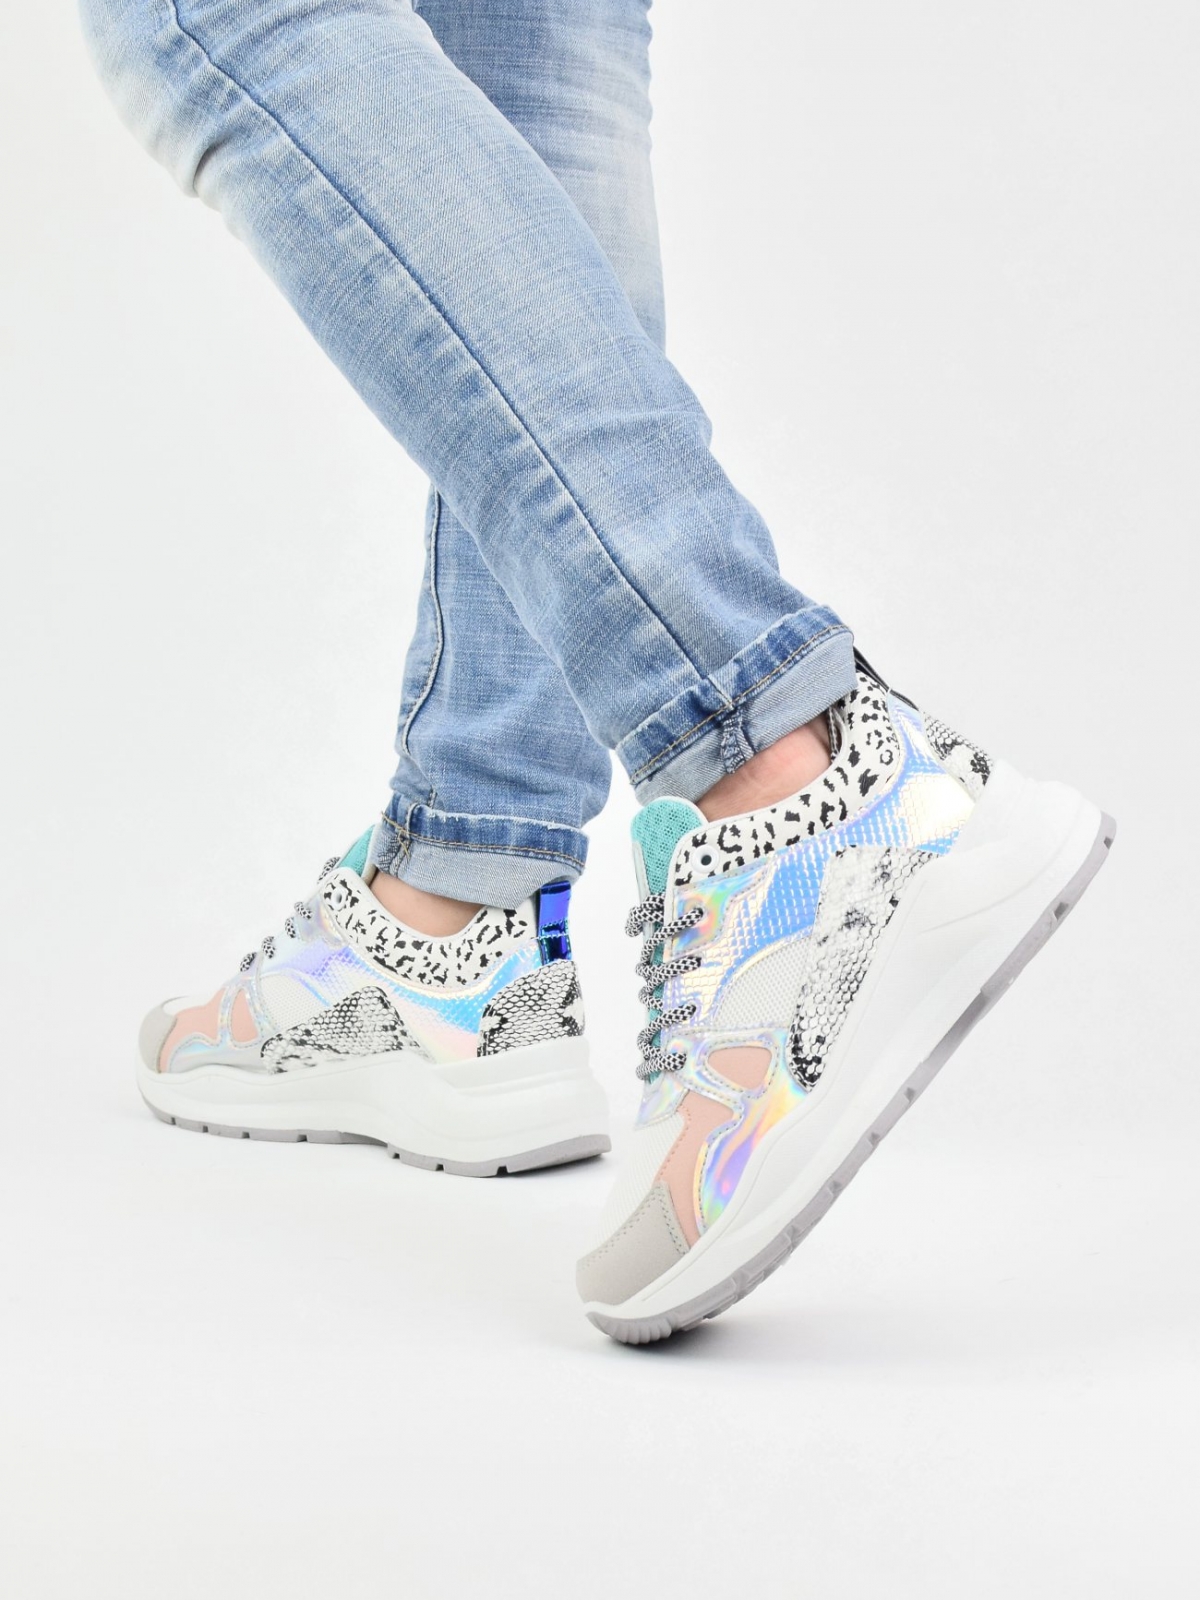 Exclusive design women's sneakers in different patterns